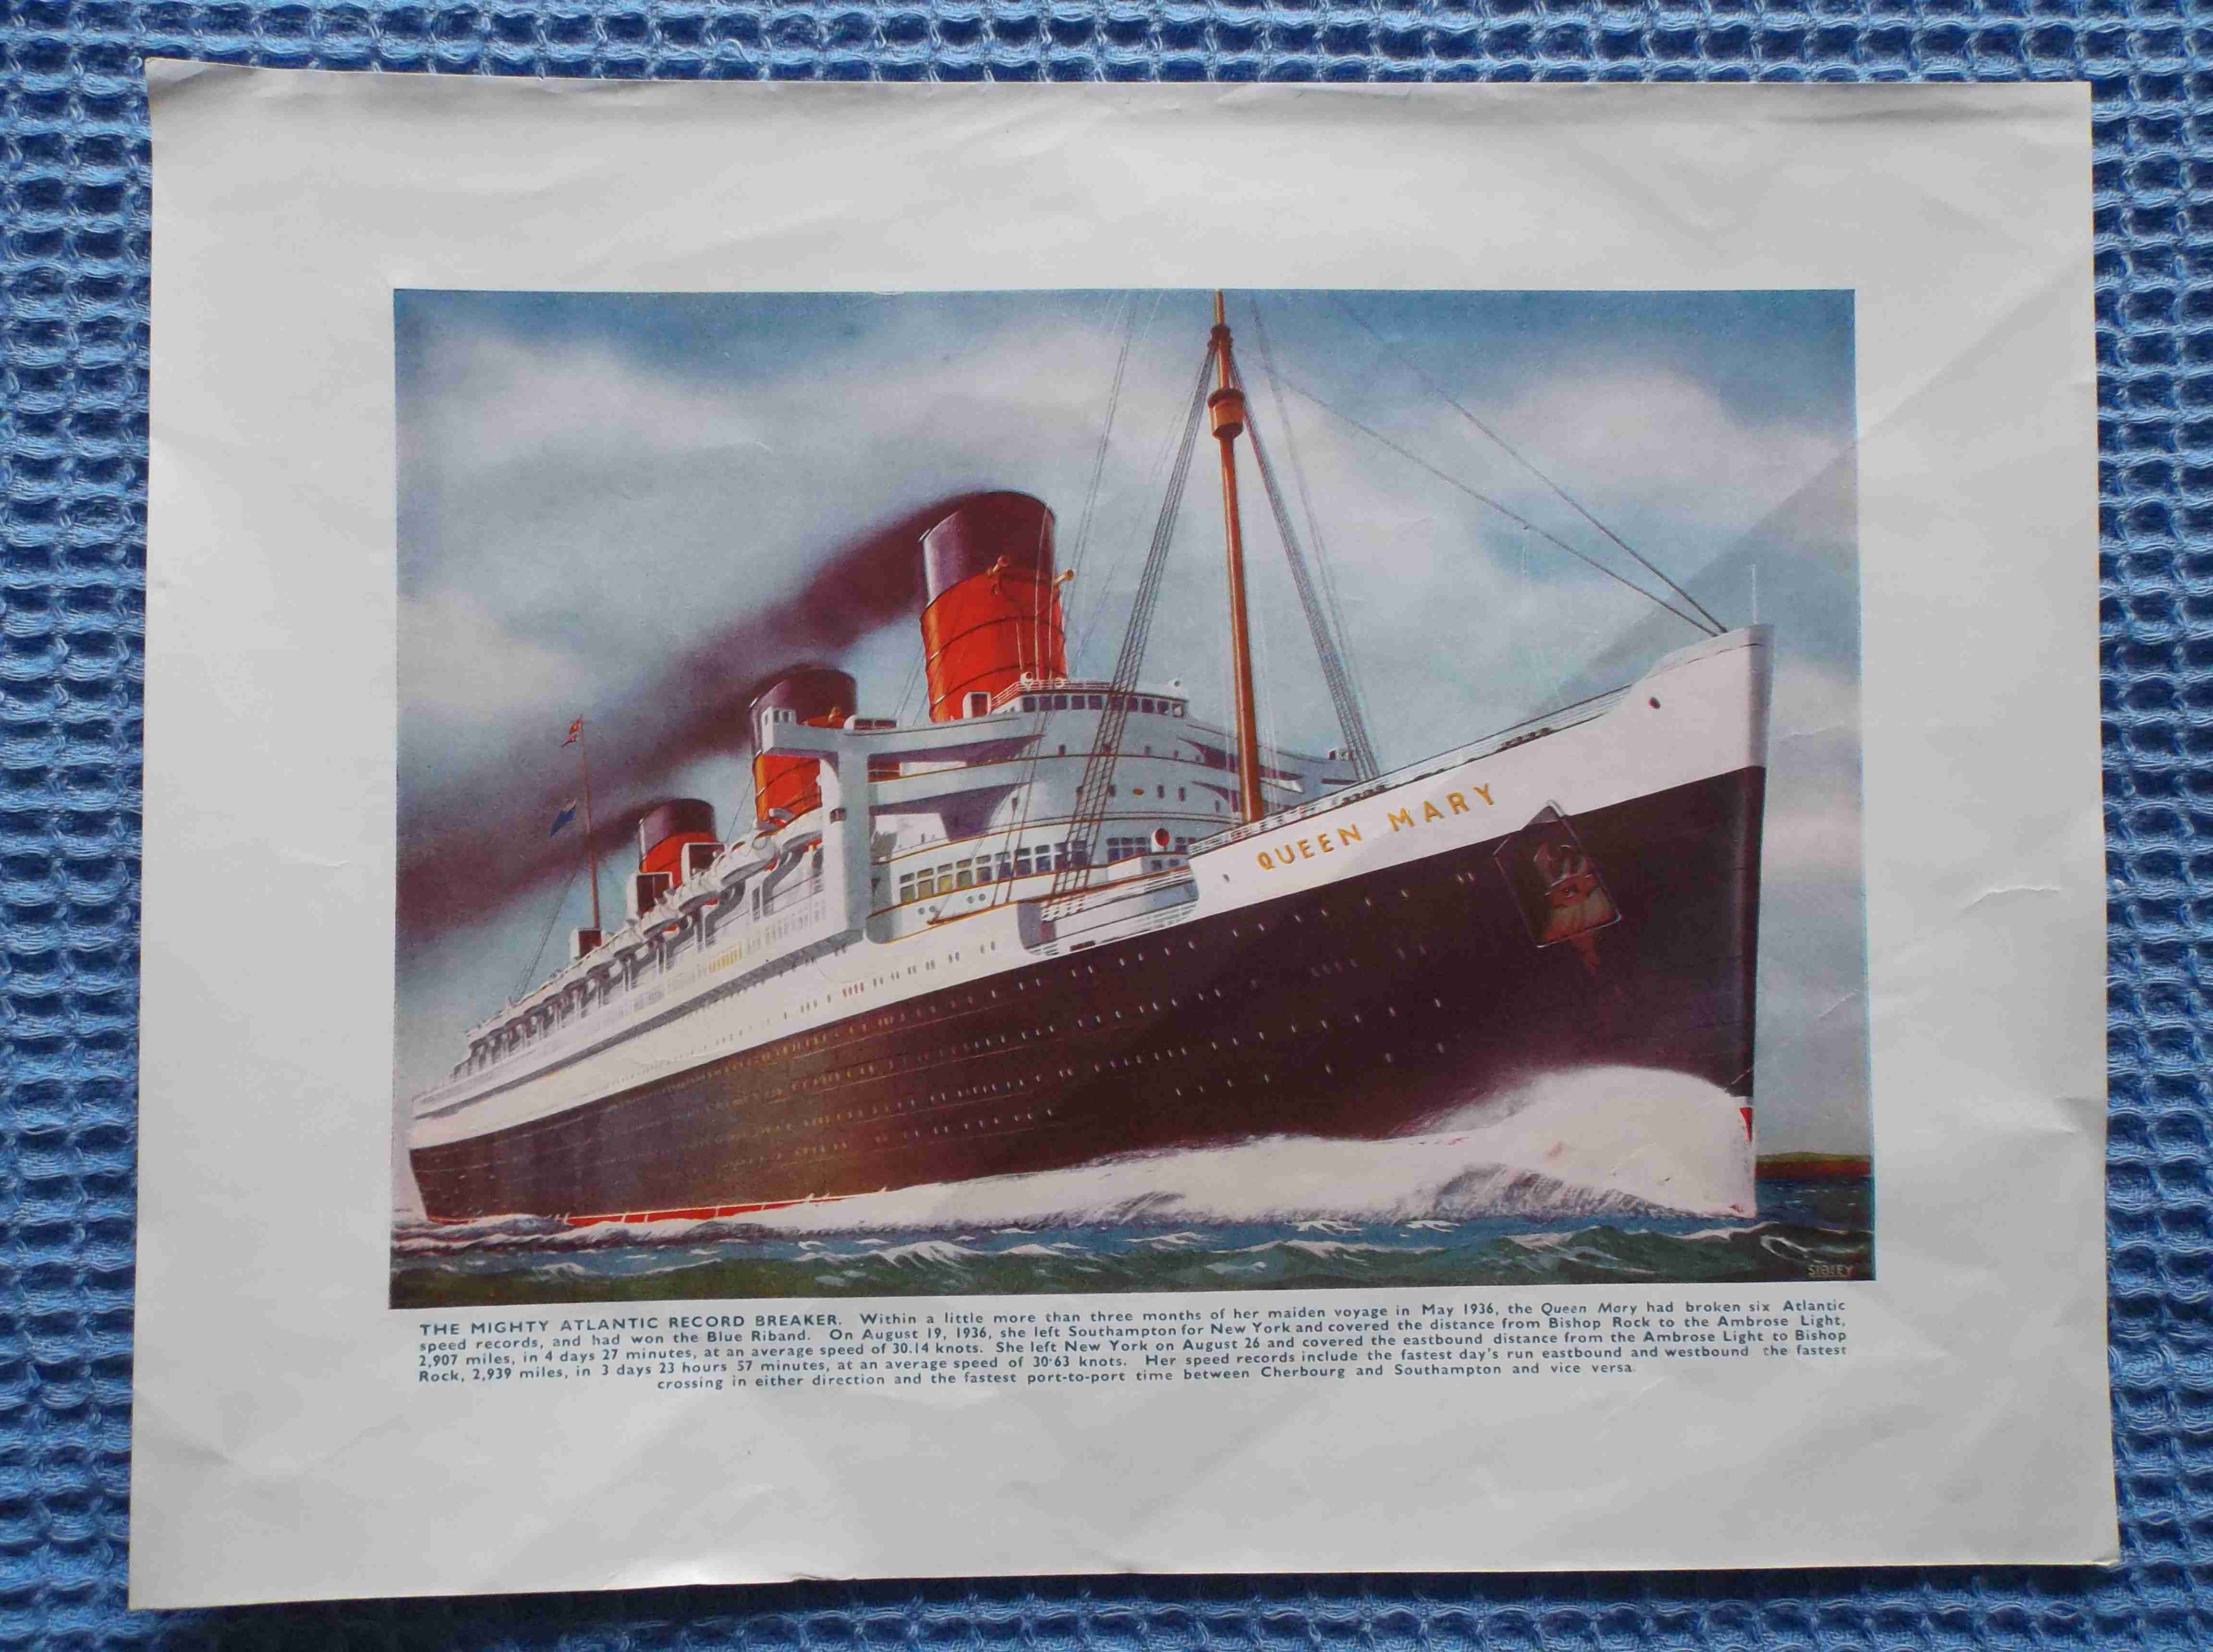 COLOUR PICTURE OF THE VESSEL THE RMS QUEEN MARY